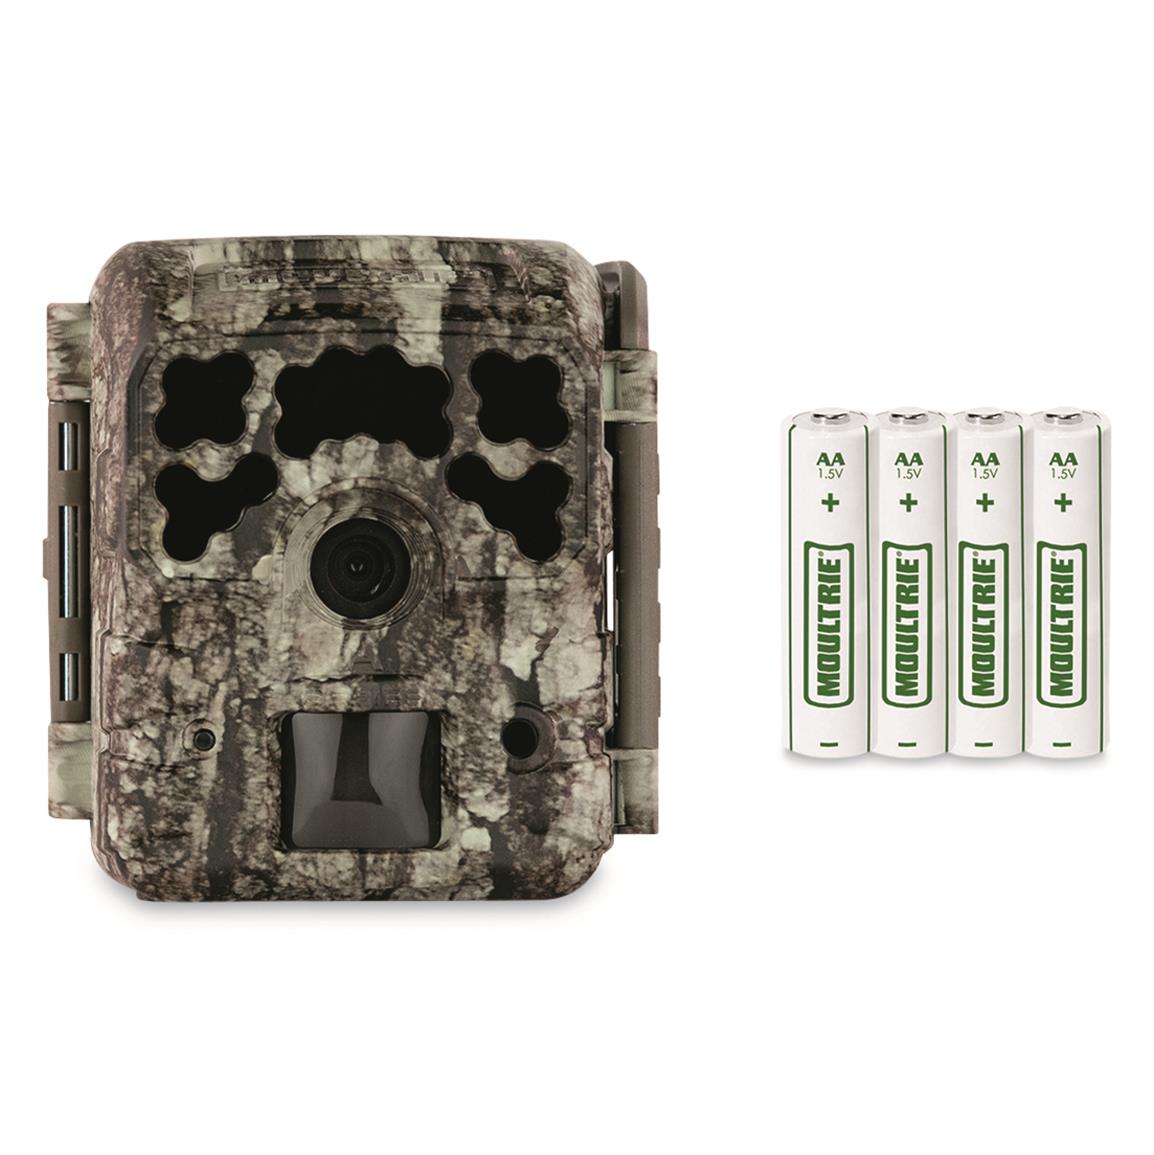 Moultrie Micro-42 Trail/Game Camera Kit, 42MP, White Bark Camouflage